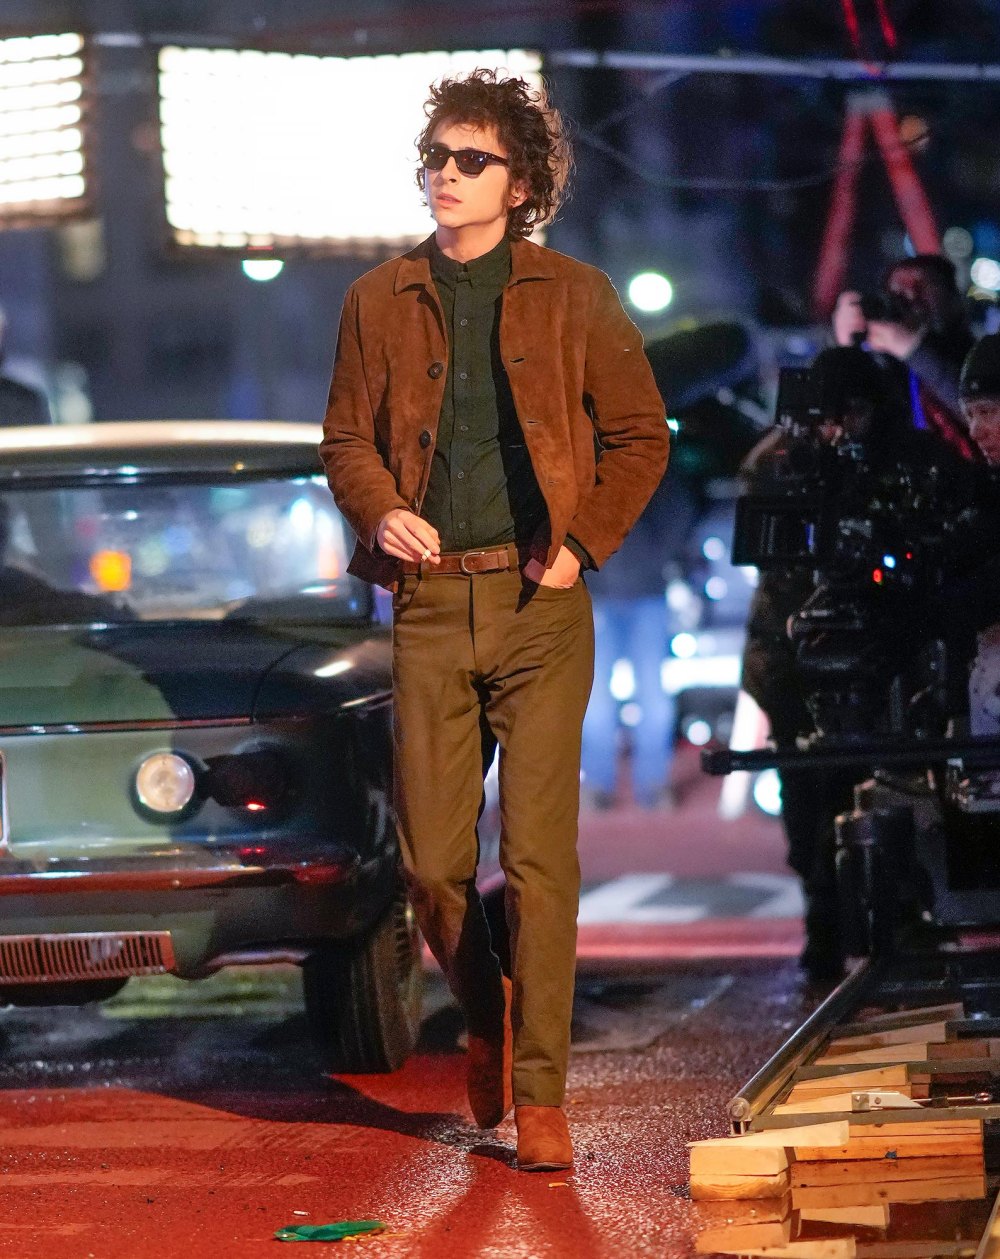 Timothee Chalamet Transforms Into Bob Dylan In Iconic Brown Suede Jacket and Sunglasses